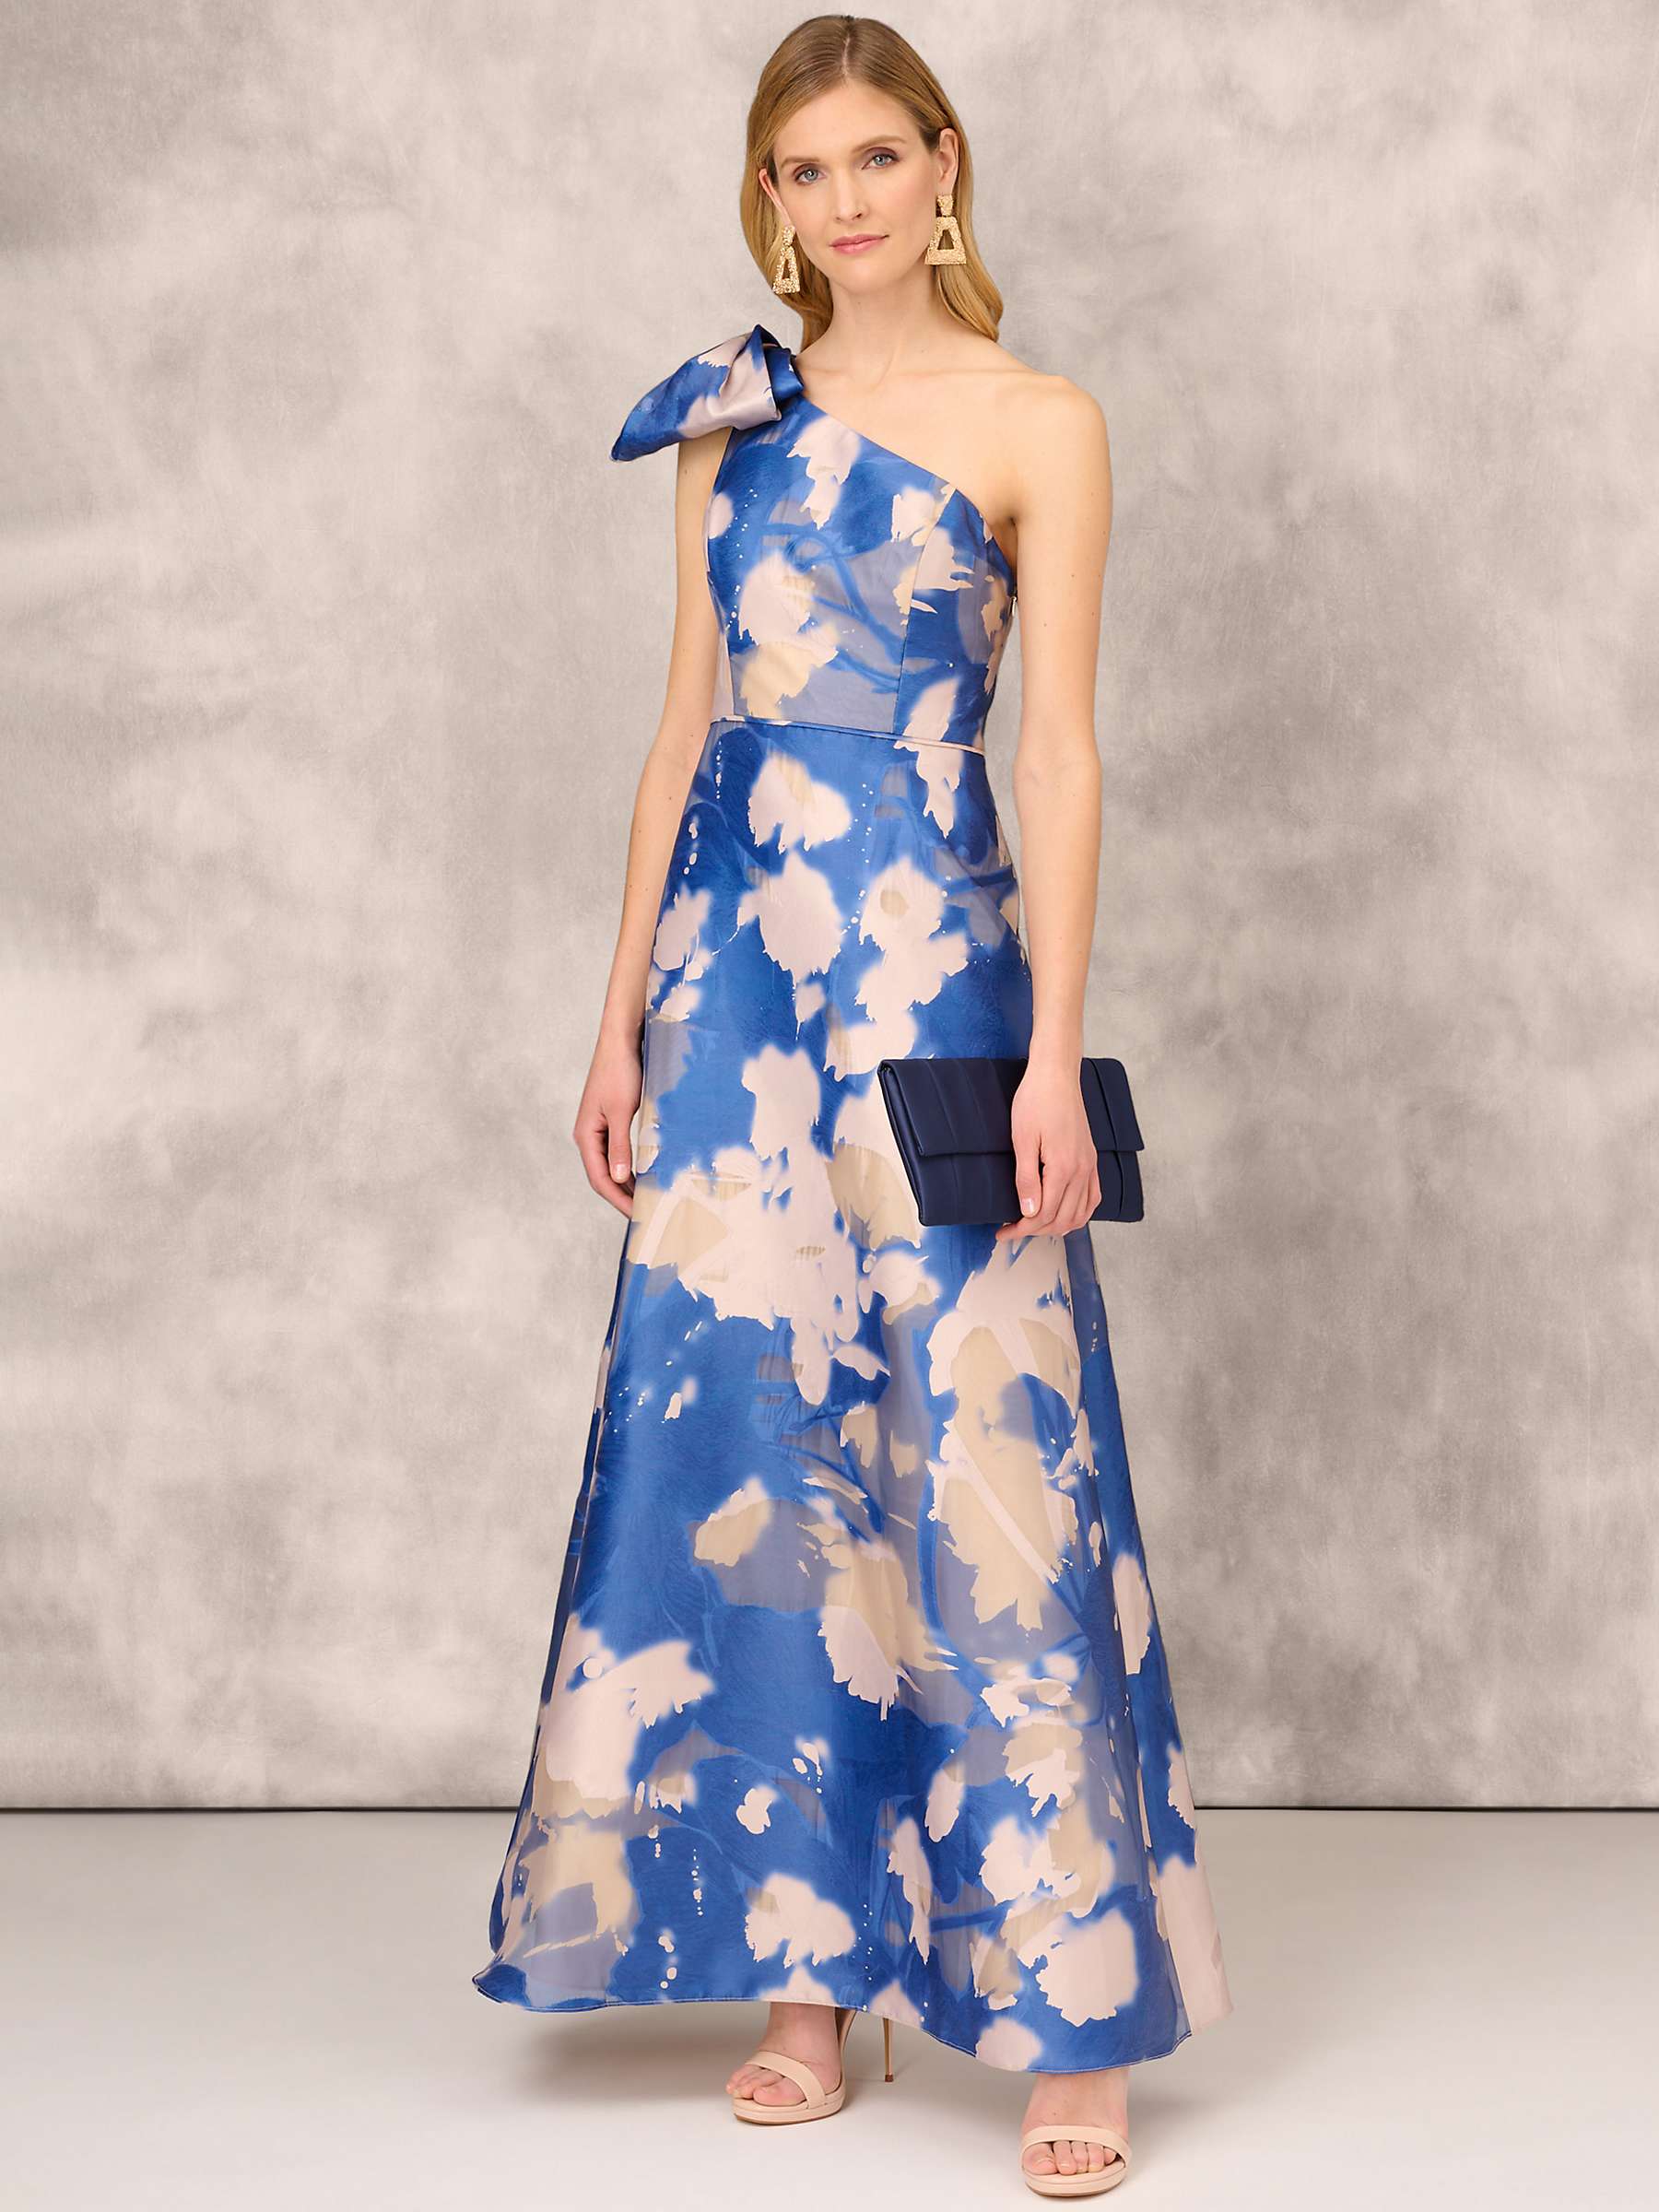 Buy Aidan Mattox by Adrianna Papell One Shoulder Burnout Maxi Dress, Royal Sapphire Online at johnlewis.com